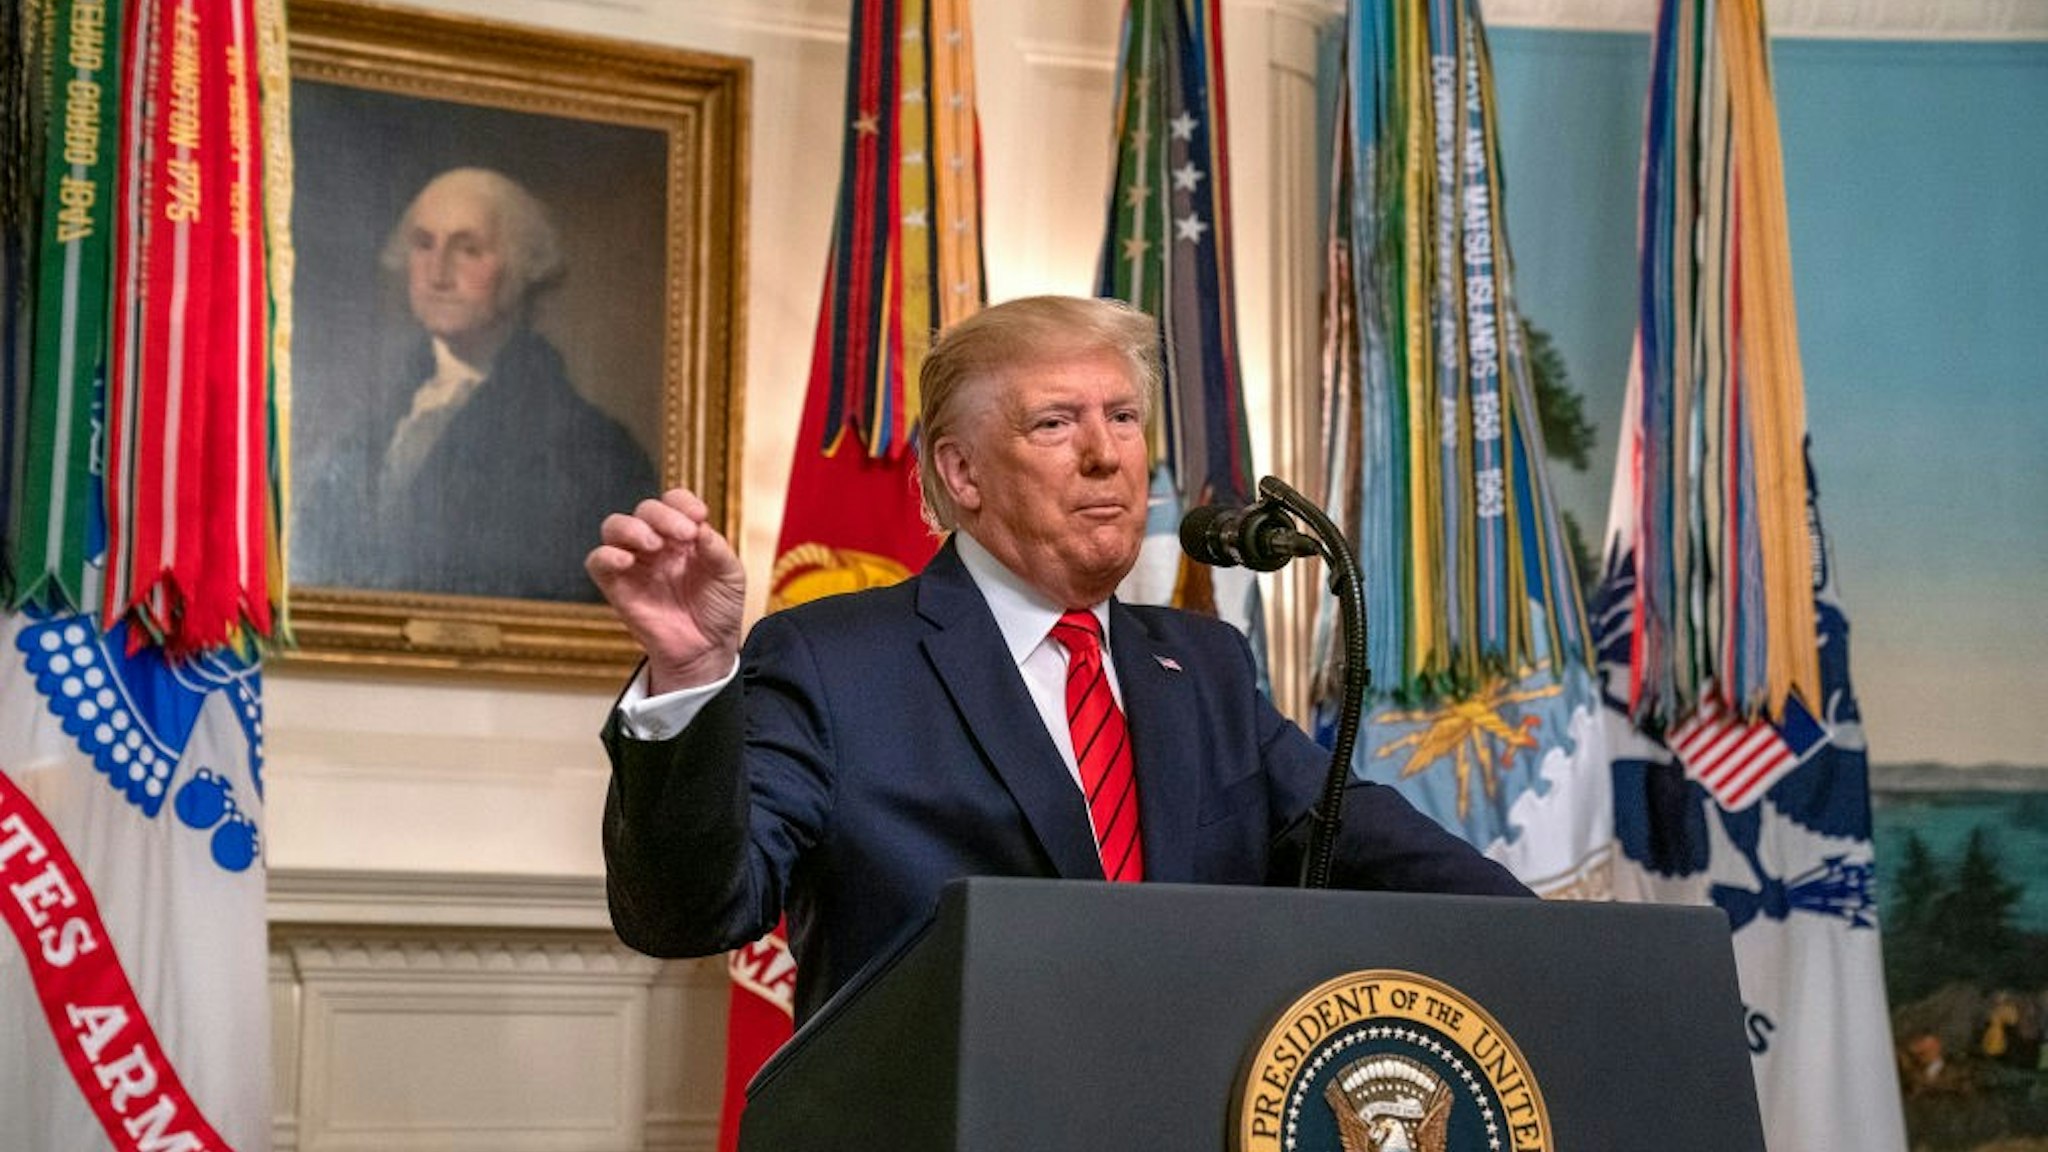 U.S. President Donald Trump makes a statement in the Diplomatic Reception Room of the White House October 27, 2019 in Washington, DC. President Trump announced that ISIS leader Abu Bakr al-Baghdadi has been killed in a military operation in northwest Syria. (Photo by Tasos Katopodis/Getty Images)